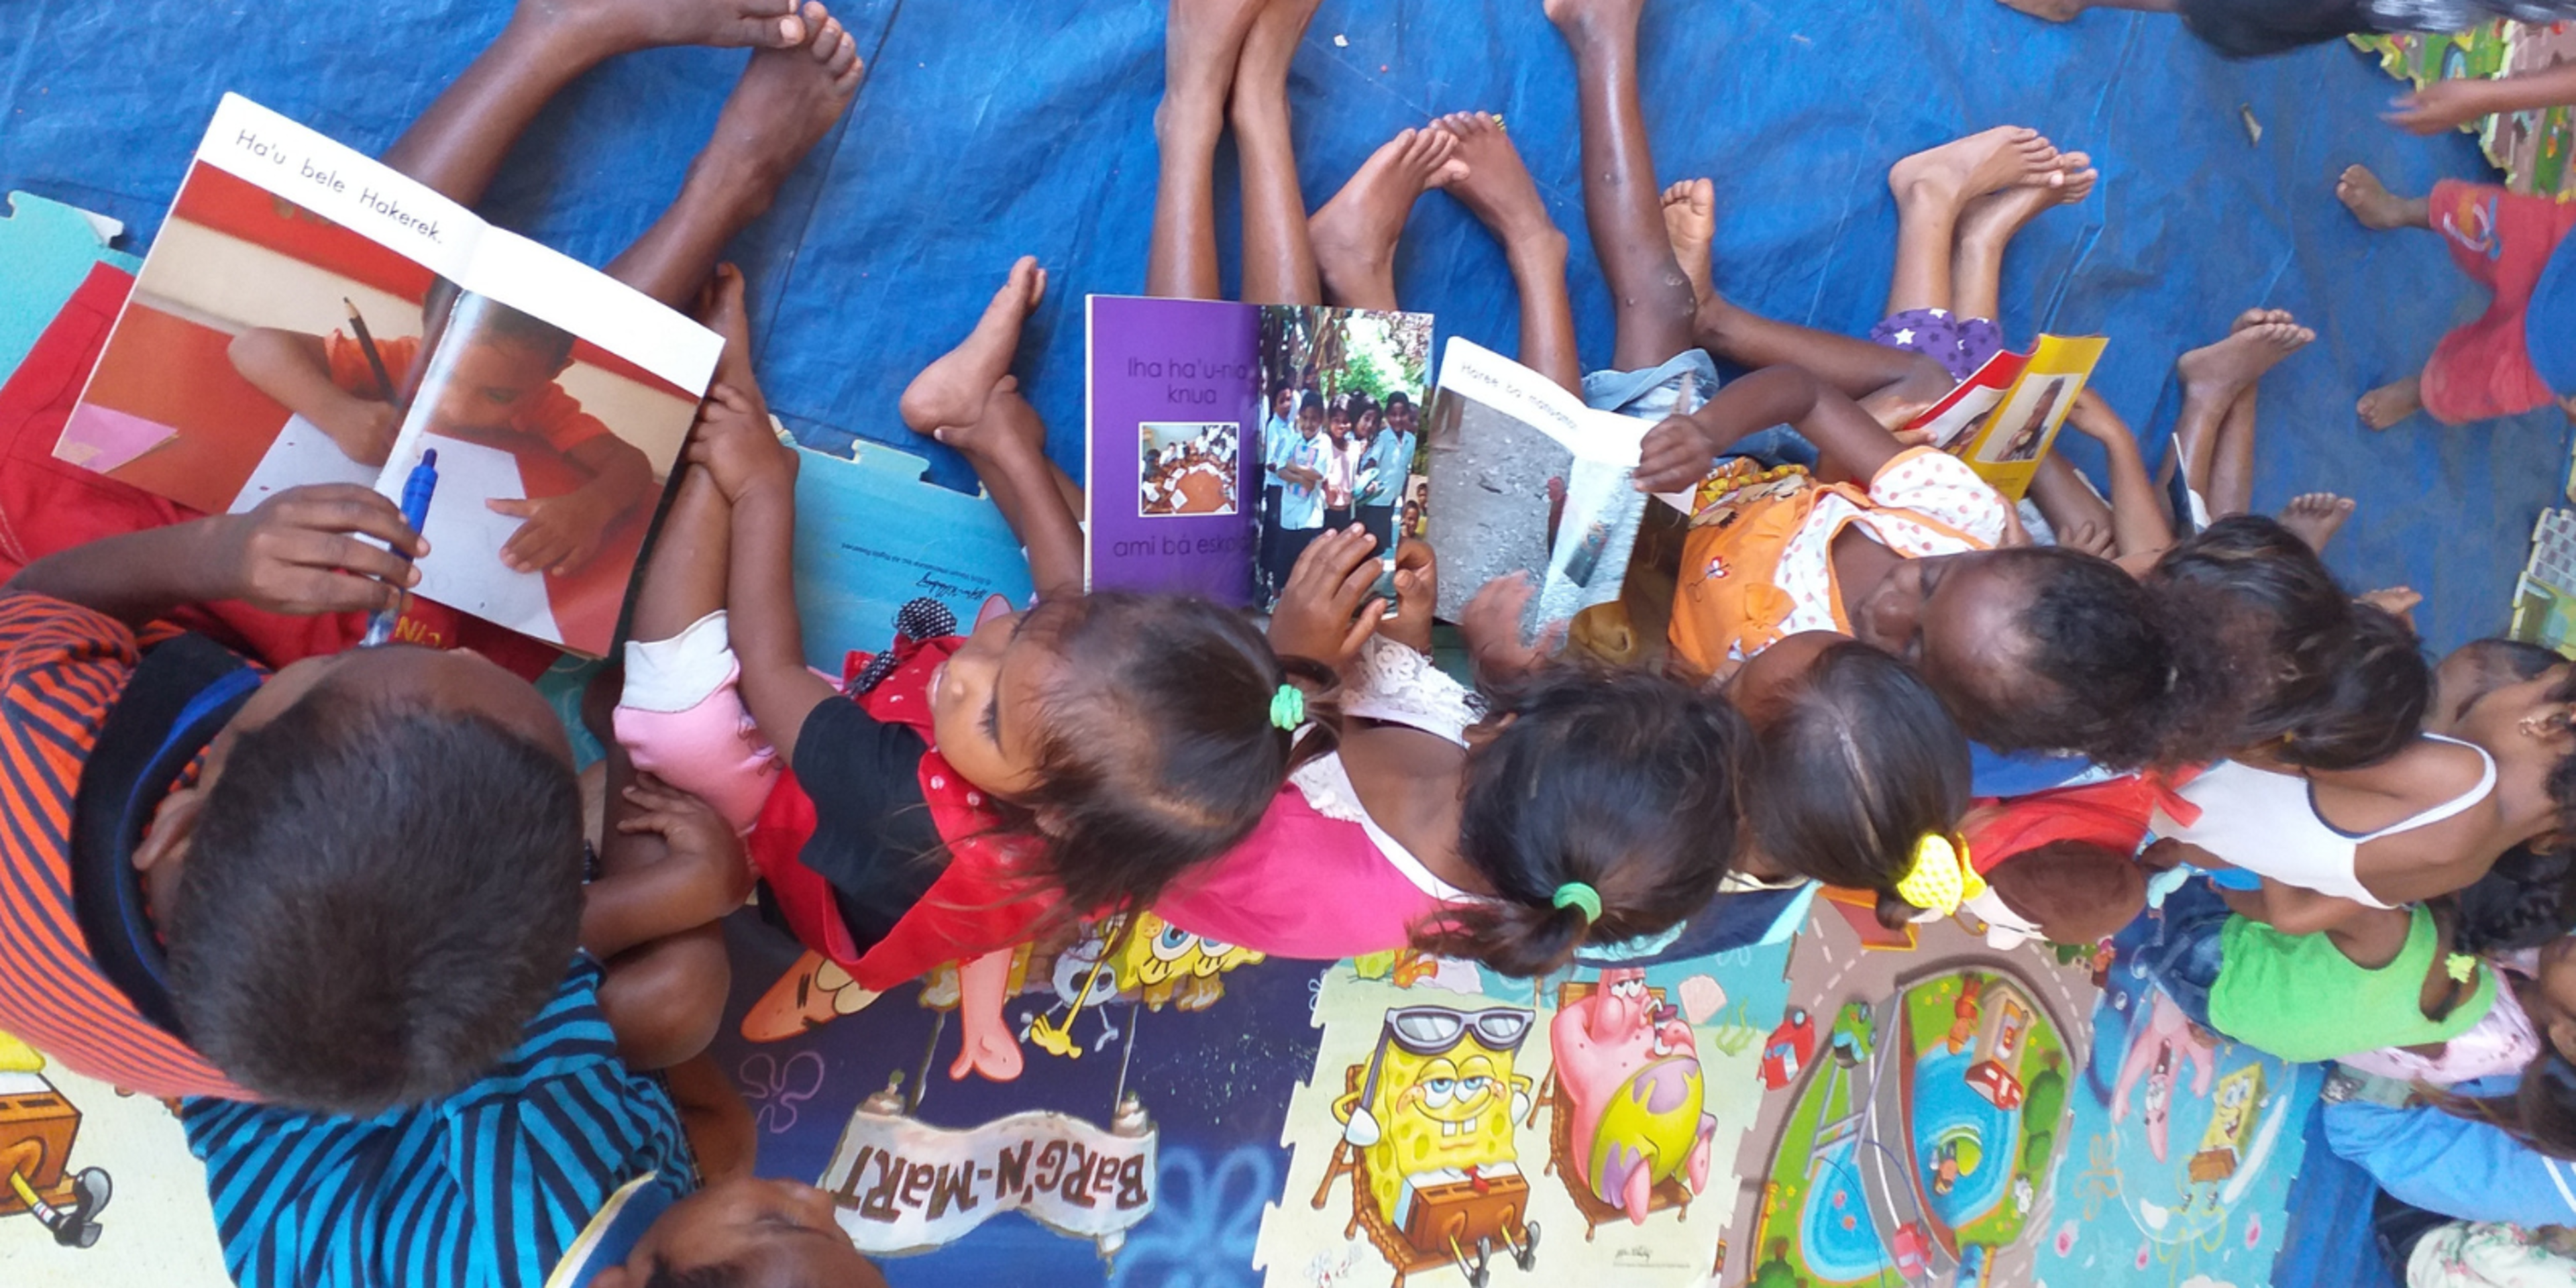 Children are excited to read a book in Tetun (one of Timor-Leste's national languages